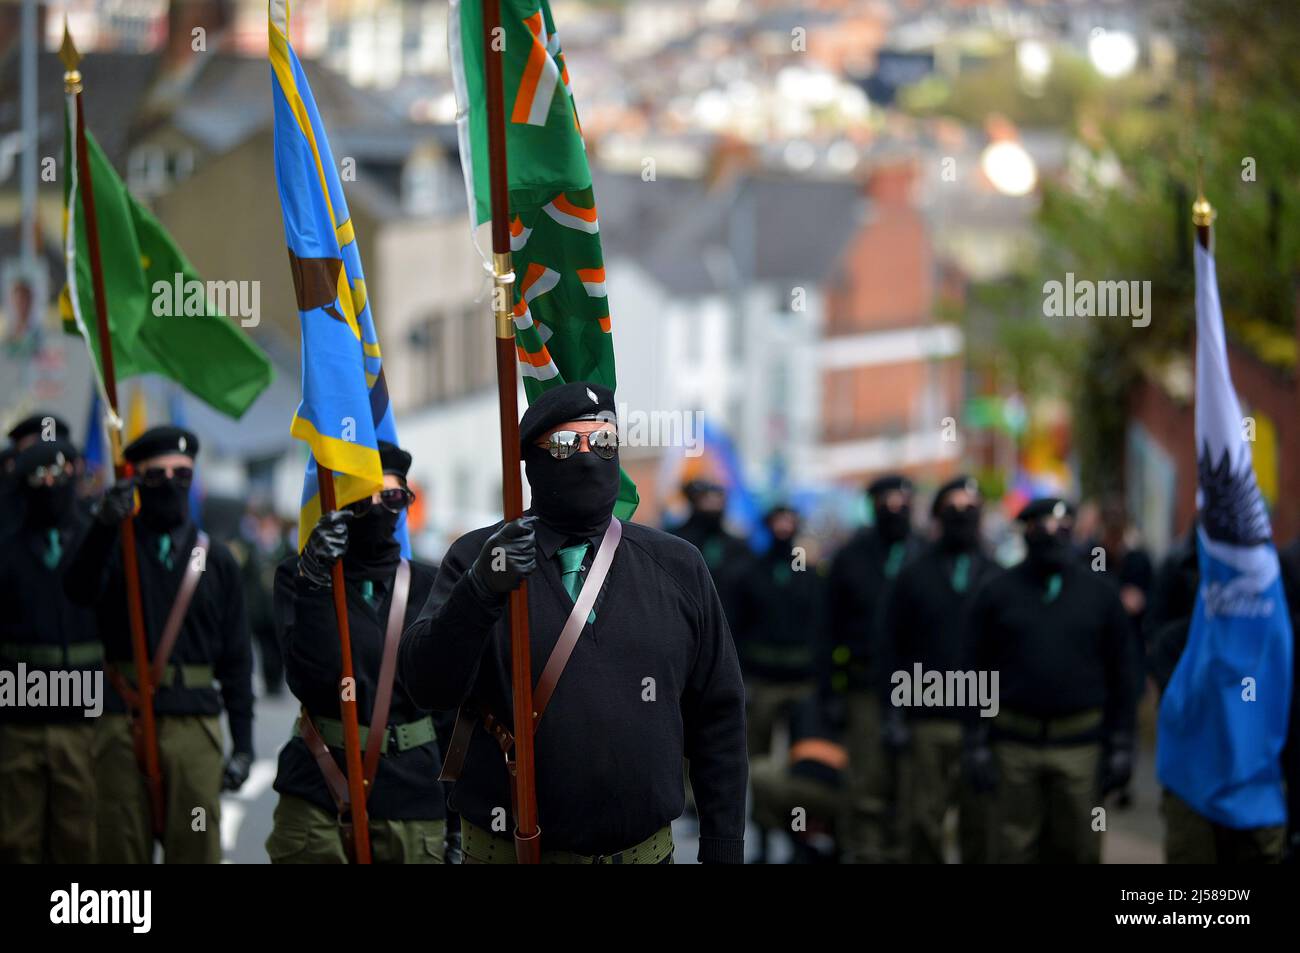 Masked men and women in paramilitary uniform at an Easter Monday Dissident Republican parade in Derry, Northern Ireland 18 March 2022. ©George Sweeney / Alamy Stock Photo Stock Photo